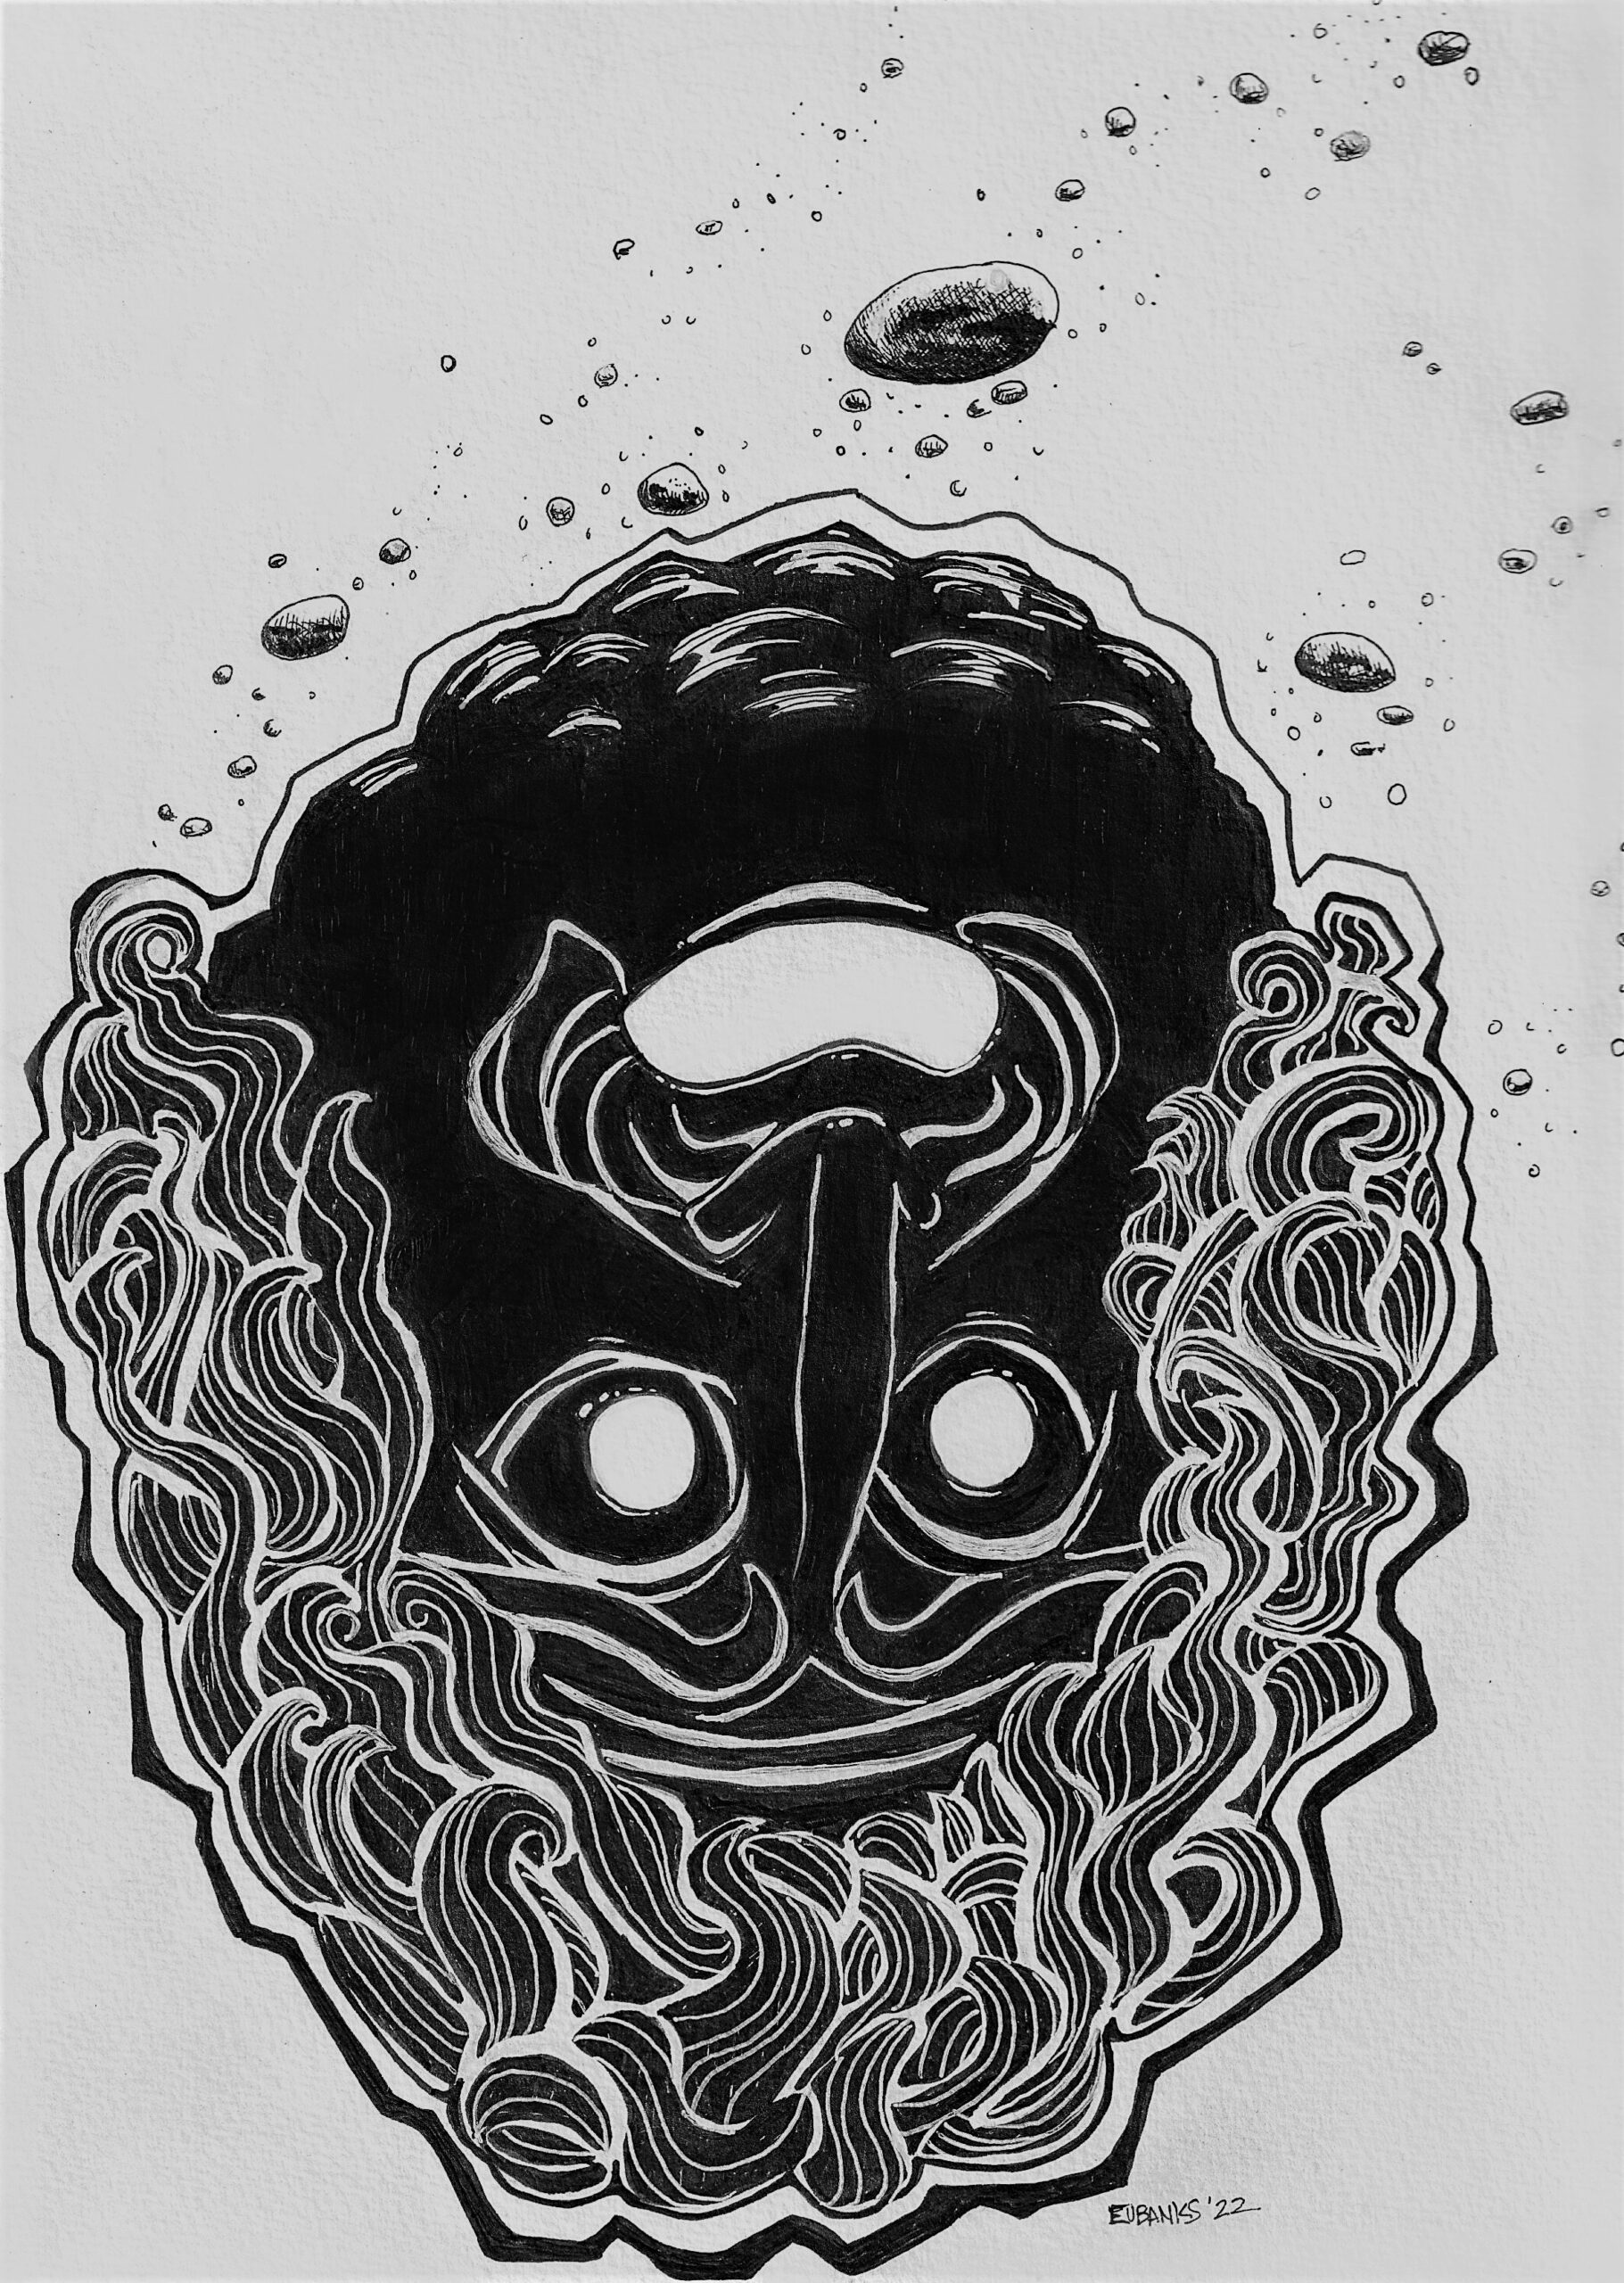 Stylized black and white illustration of an upside-down Greek tragedy mask. Bubbles stream from it. 